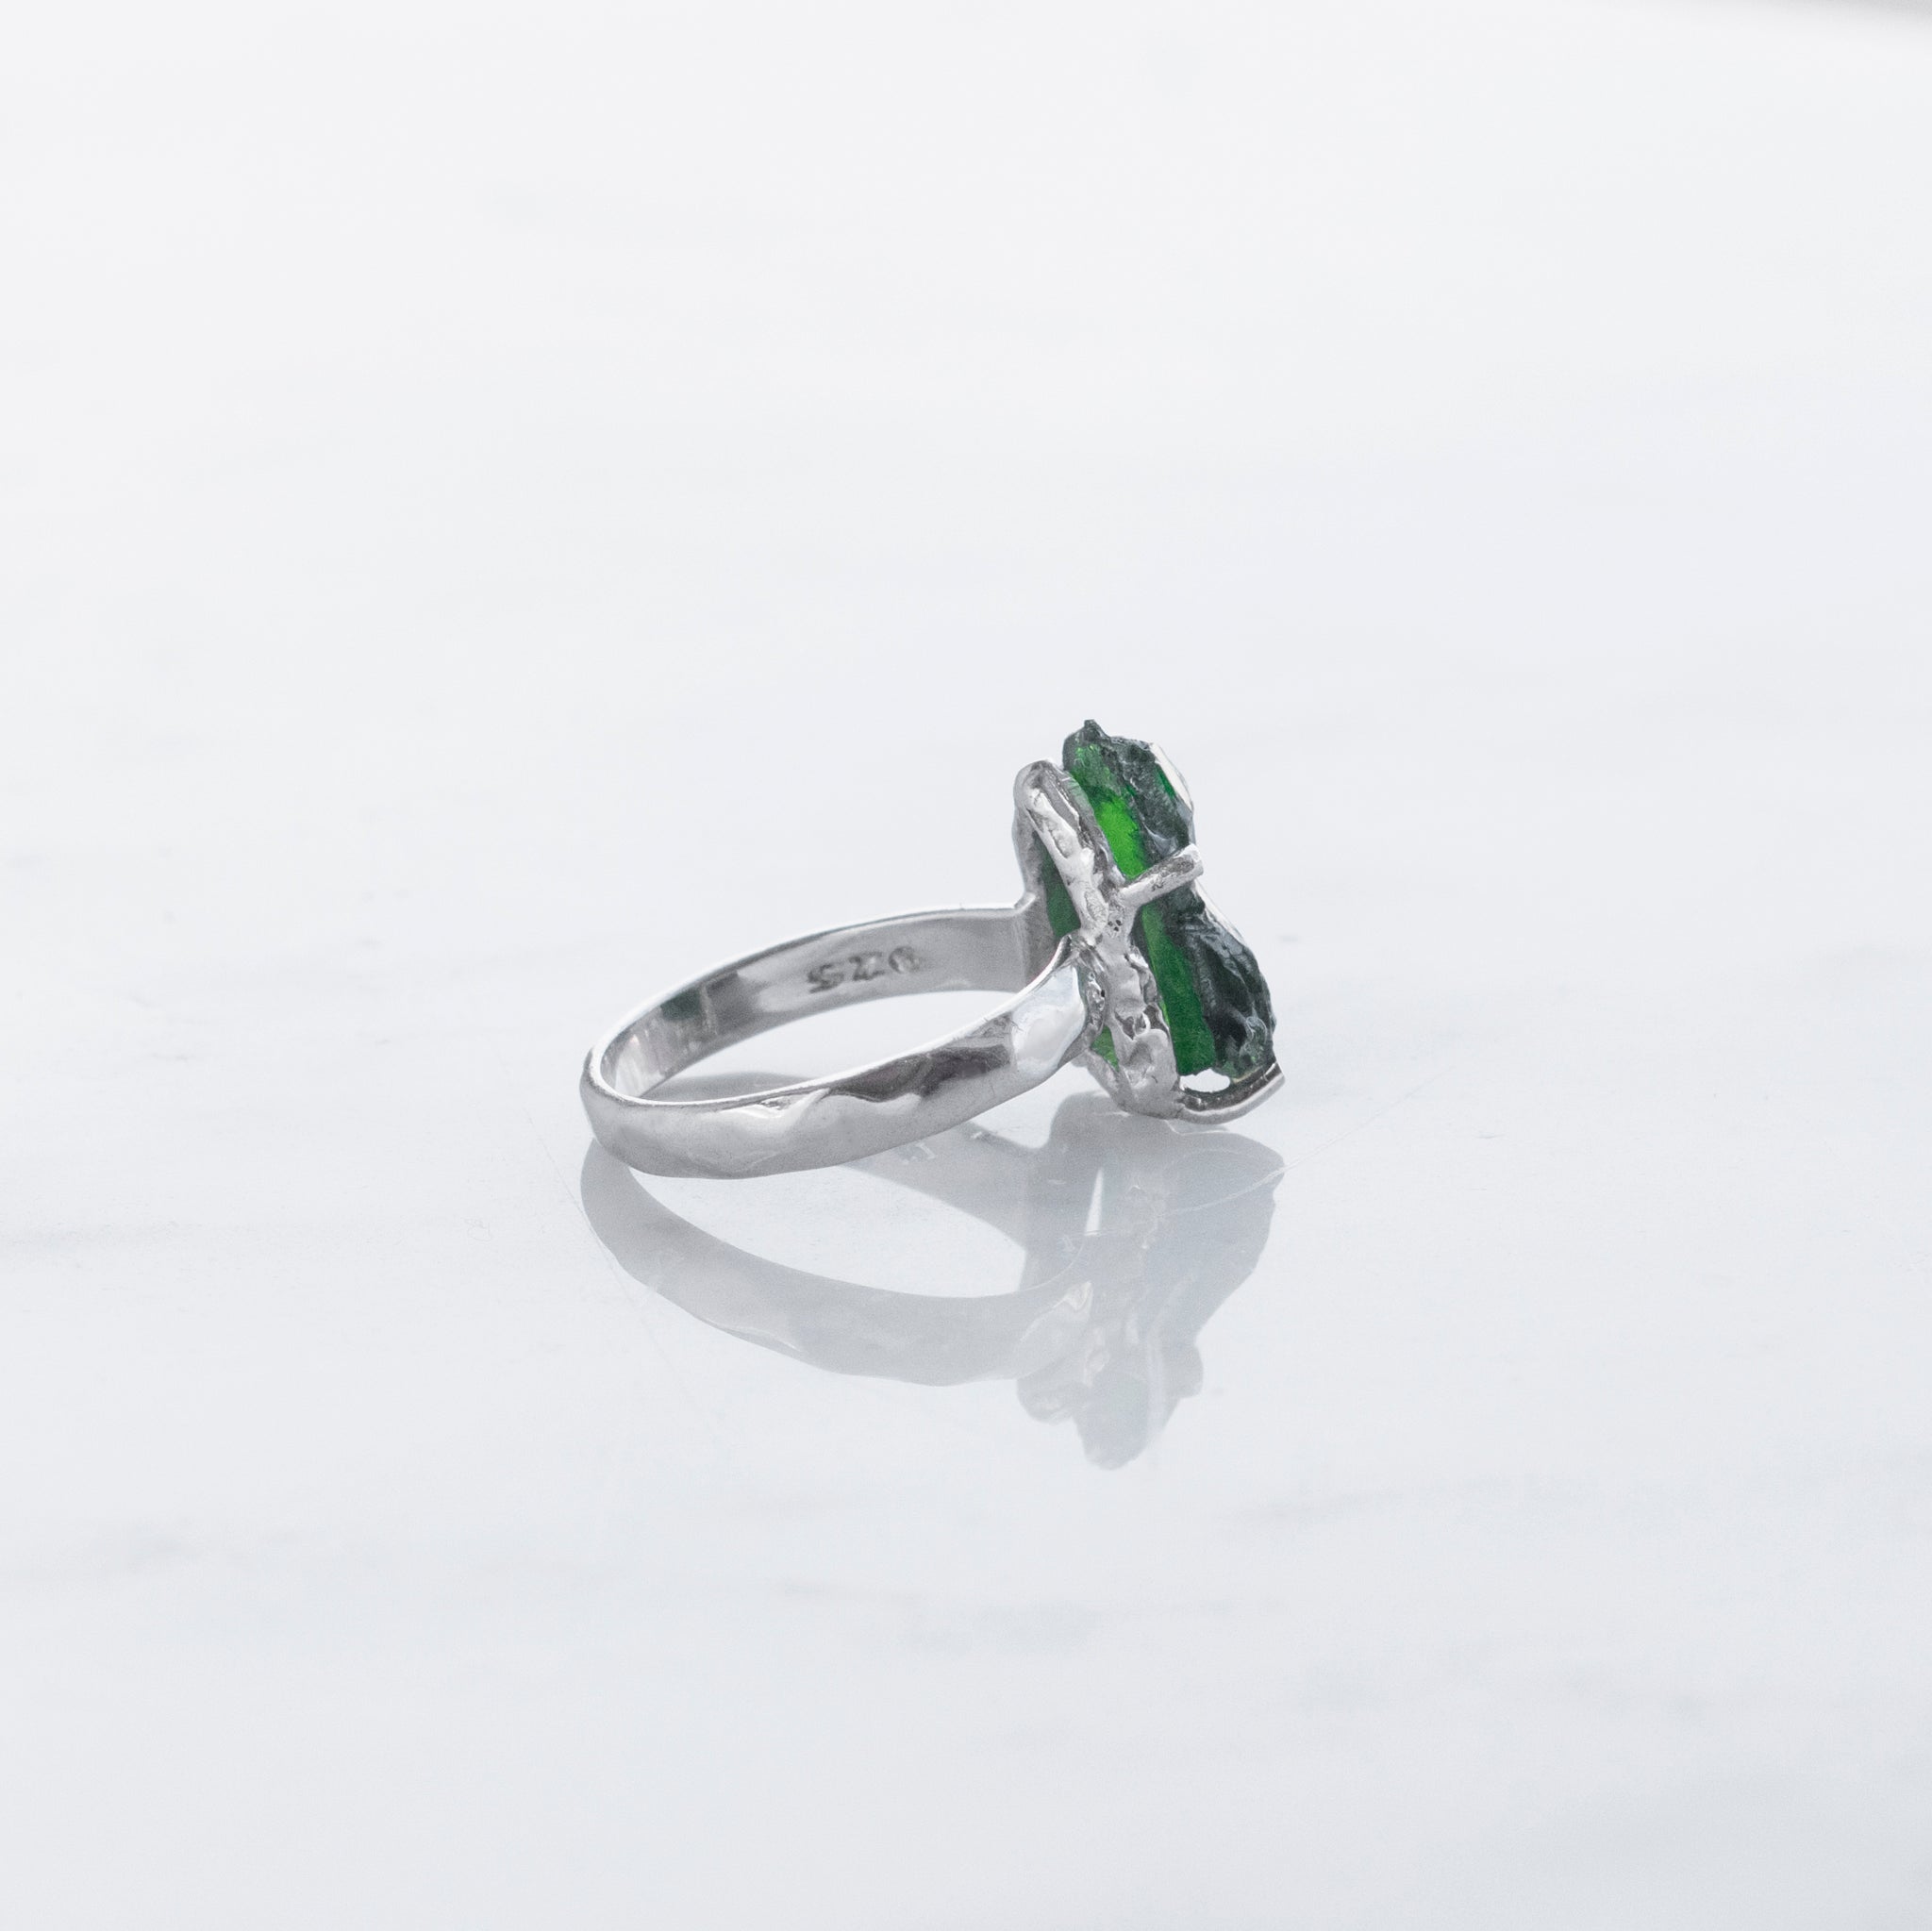 Chrome diopside rough crystal ring Anahata